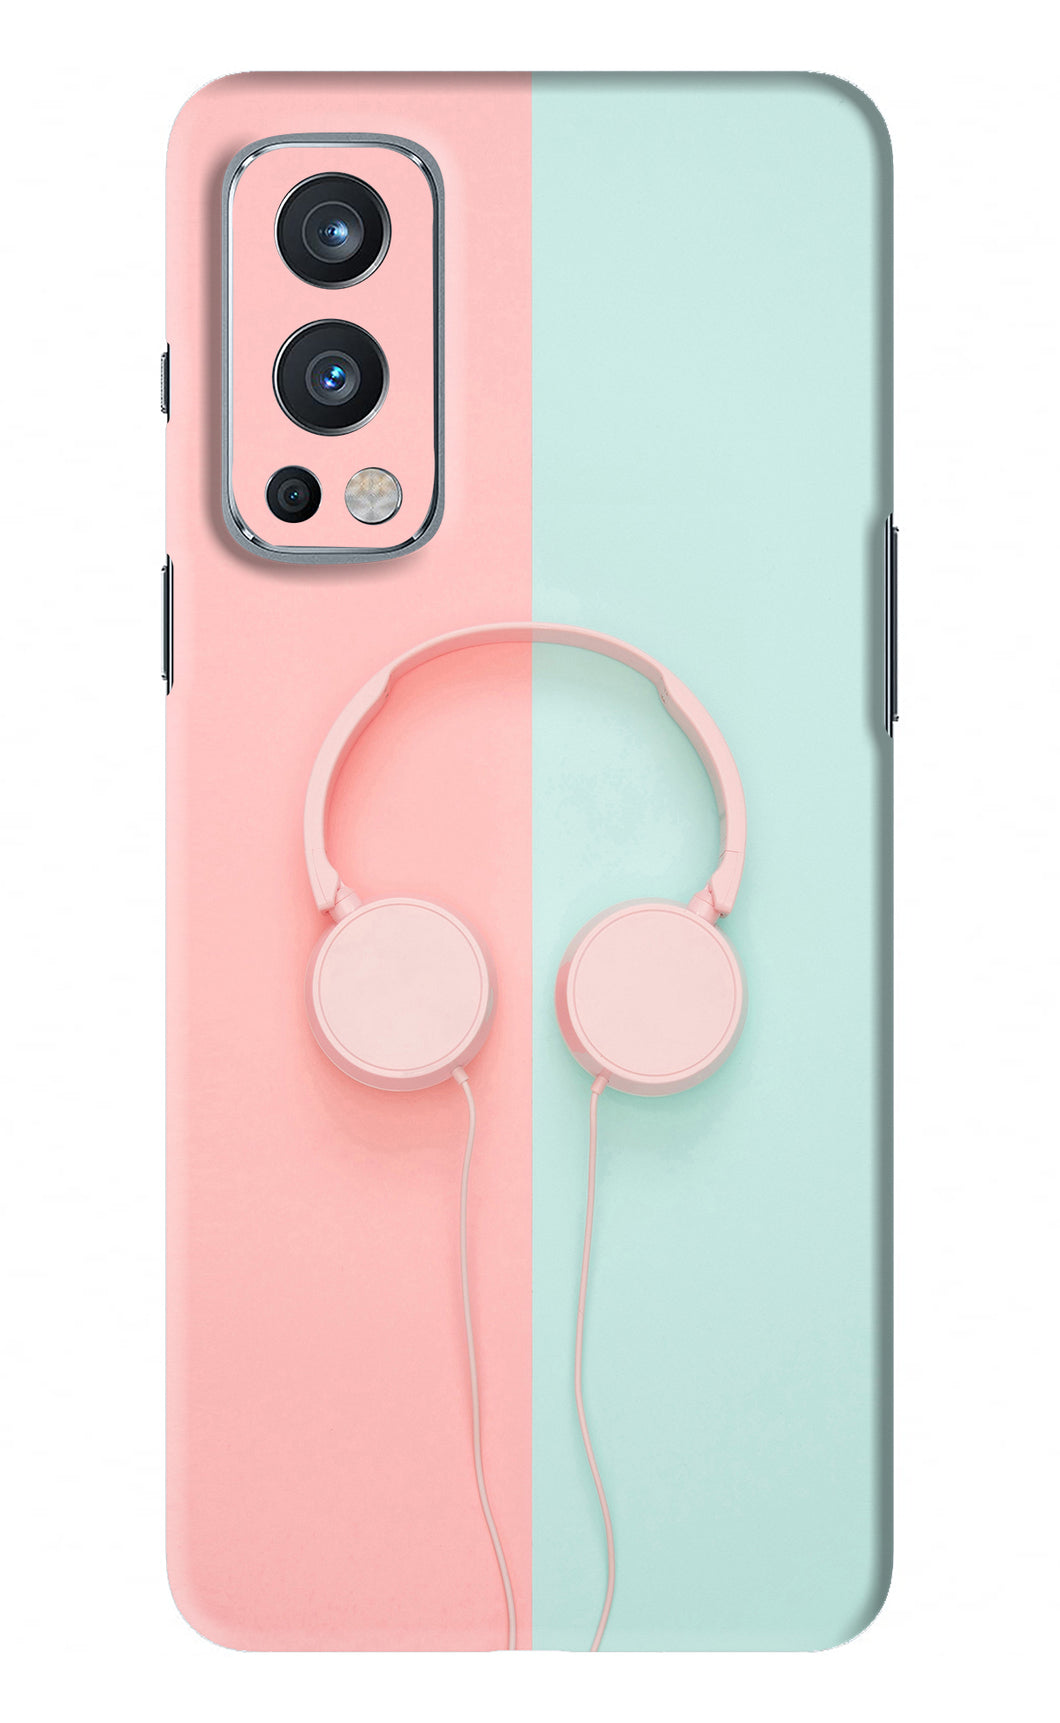 Music Lover Oneplus Nord 2 Back Skin Wrap